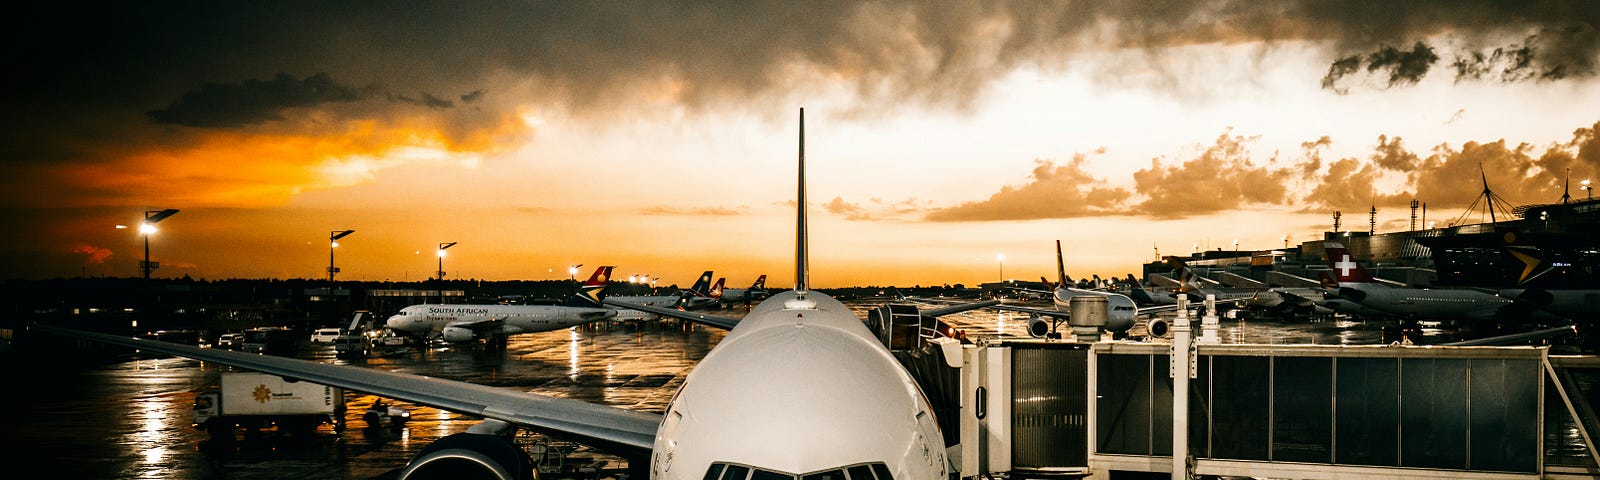 A plane waits on the tarmac of the airport during sunset time.